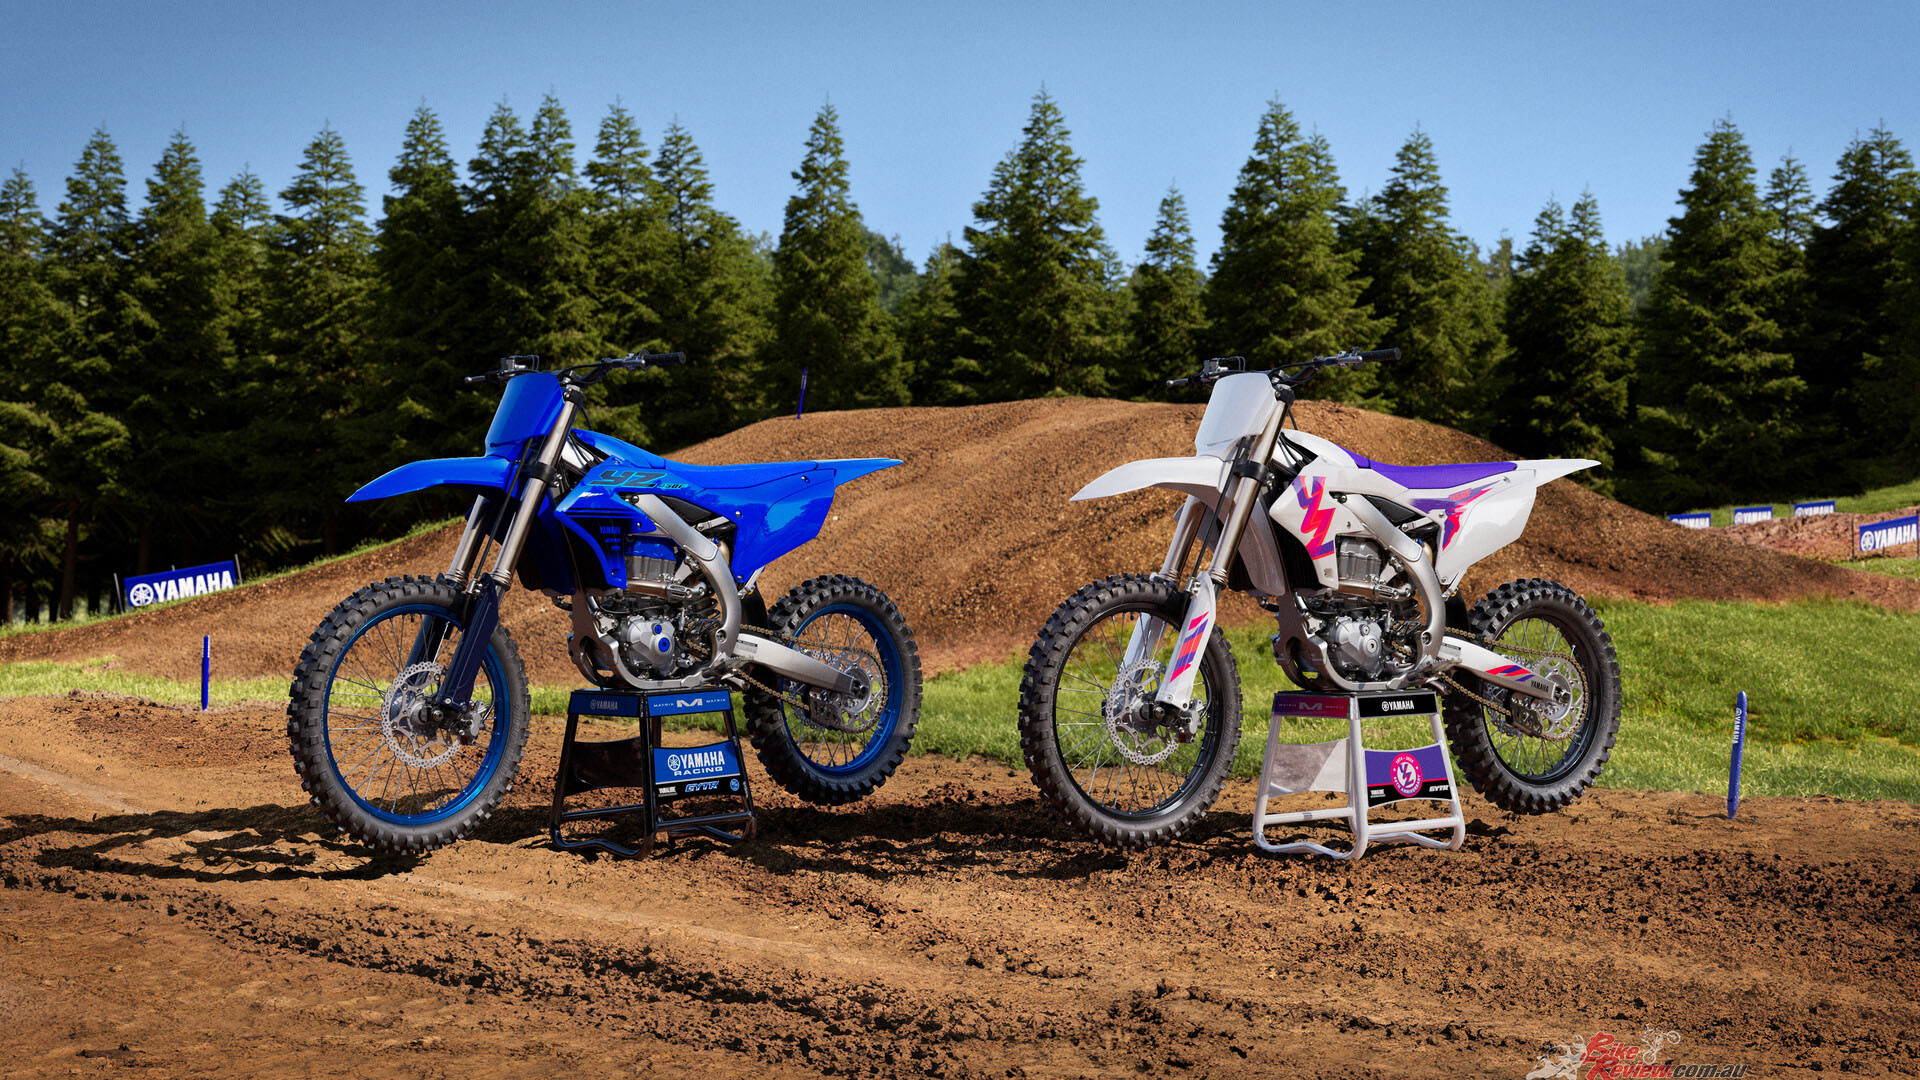 The ultimate open class YZ YZ450F is the bike to beat in Australia with Dean Ferris leading the charge following Aaron Tanti's 2022 ProMX title.